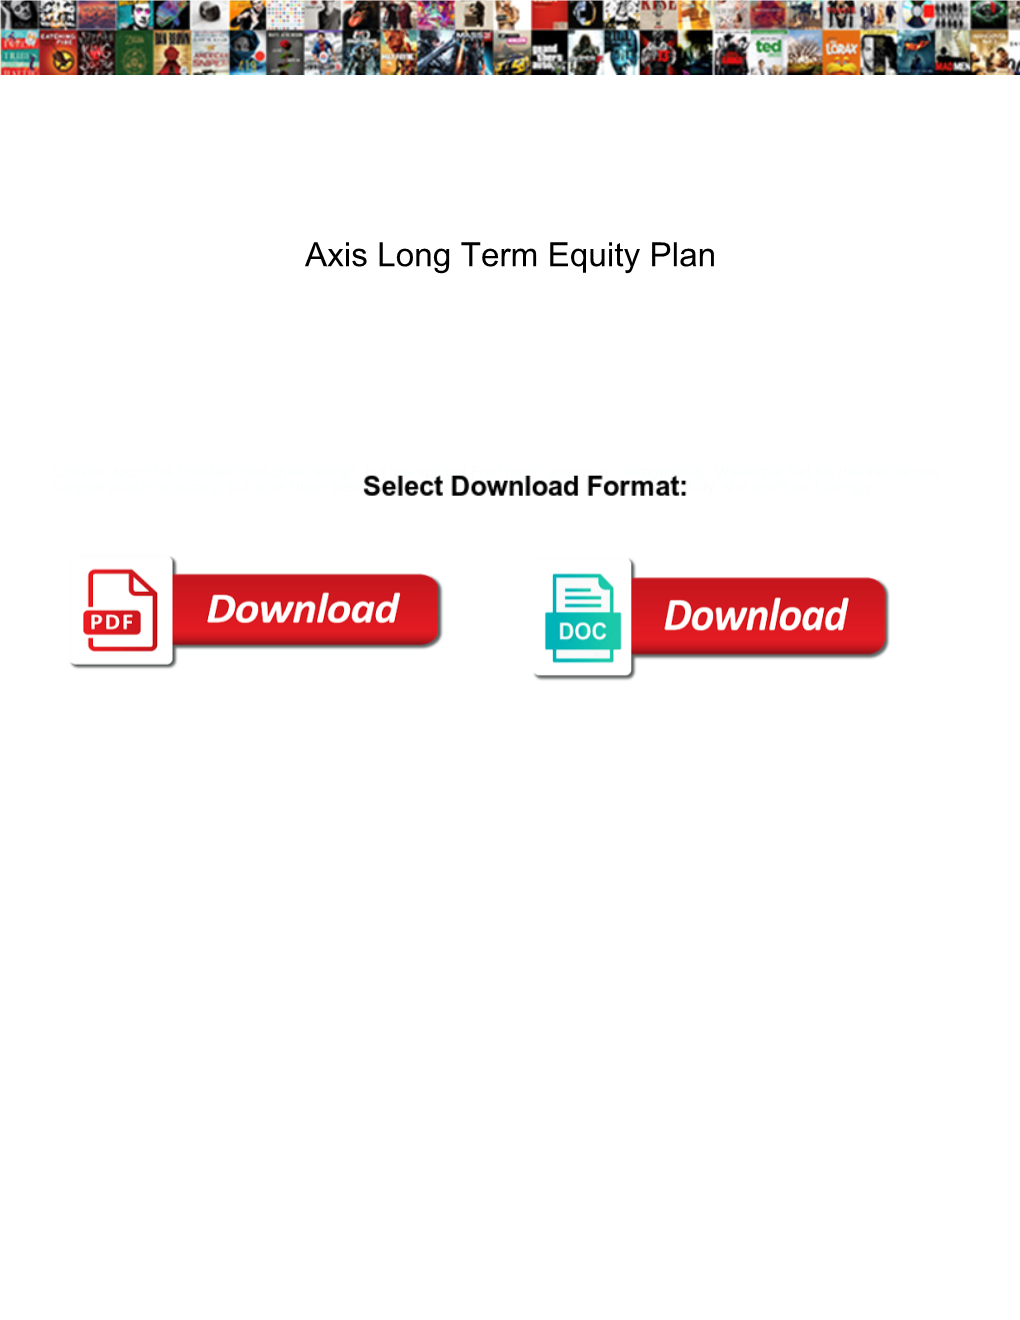 Axis Long Term Equity Plan